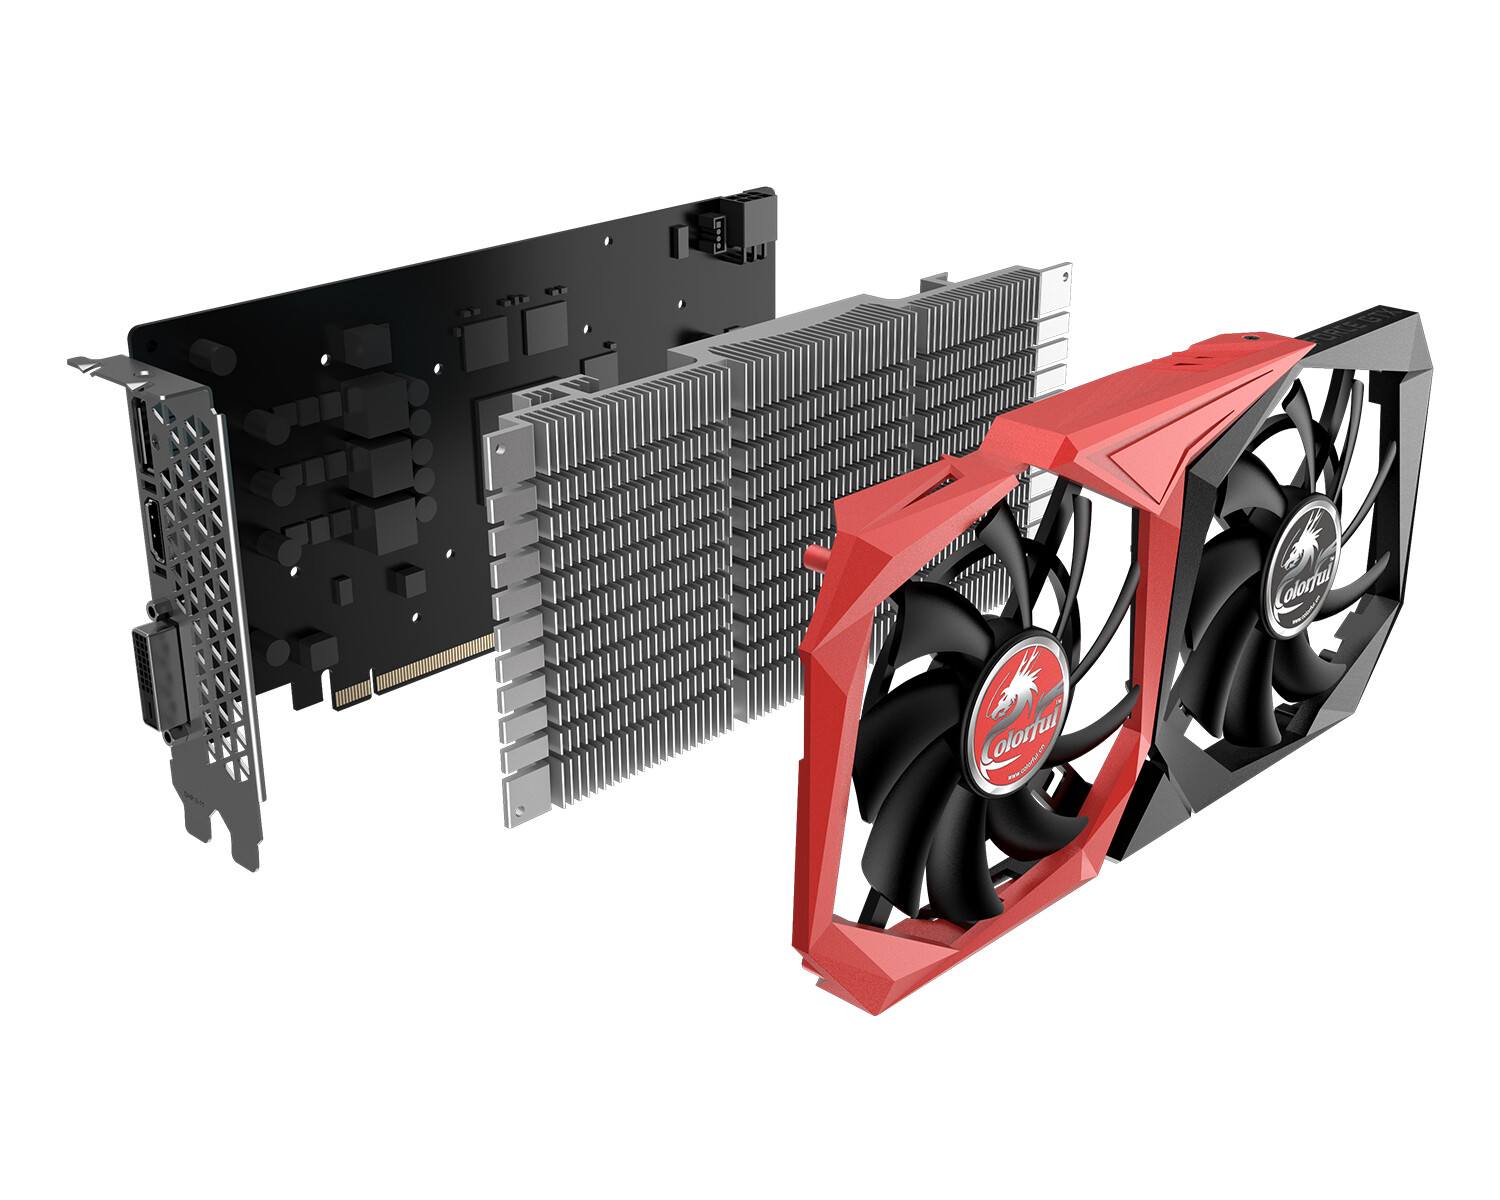 COLORFUL Officially Announces GeForce GTX 1630 NB 4G - returnal